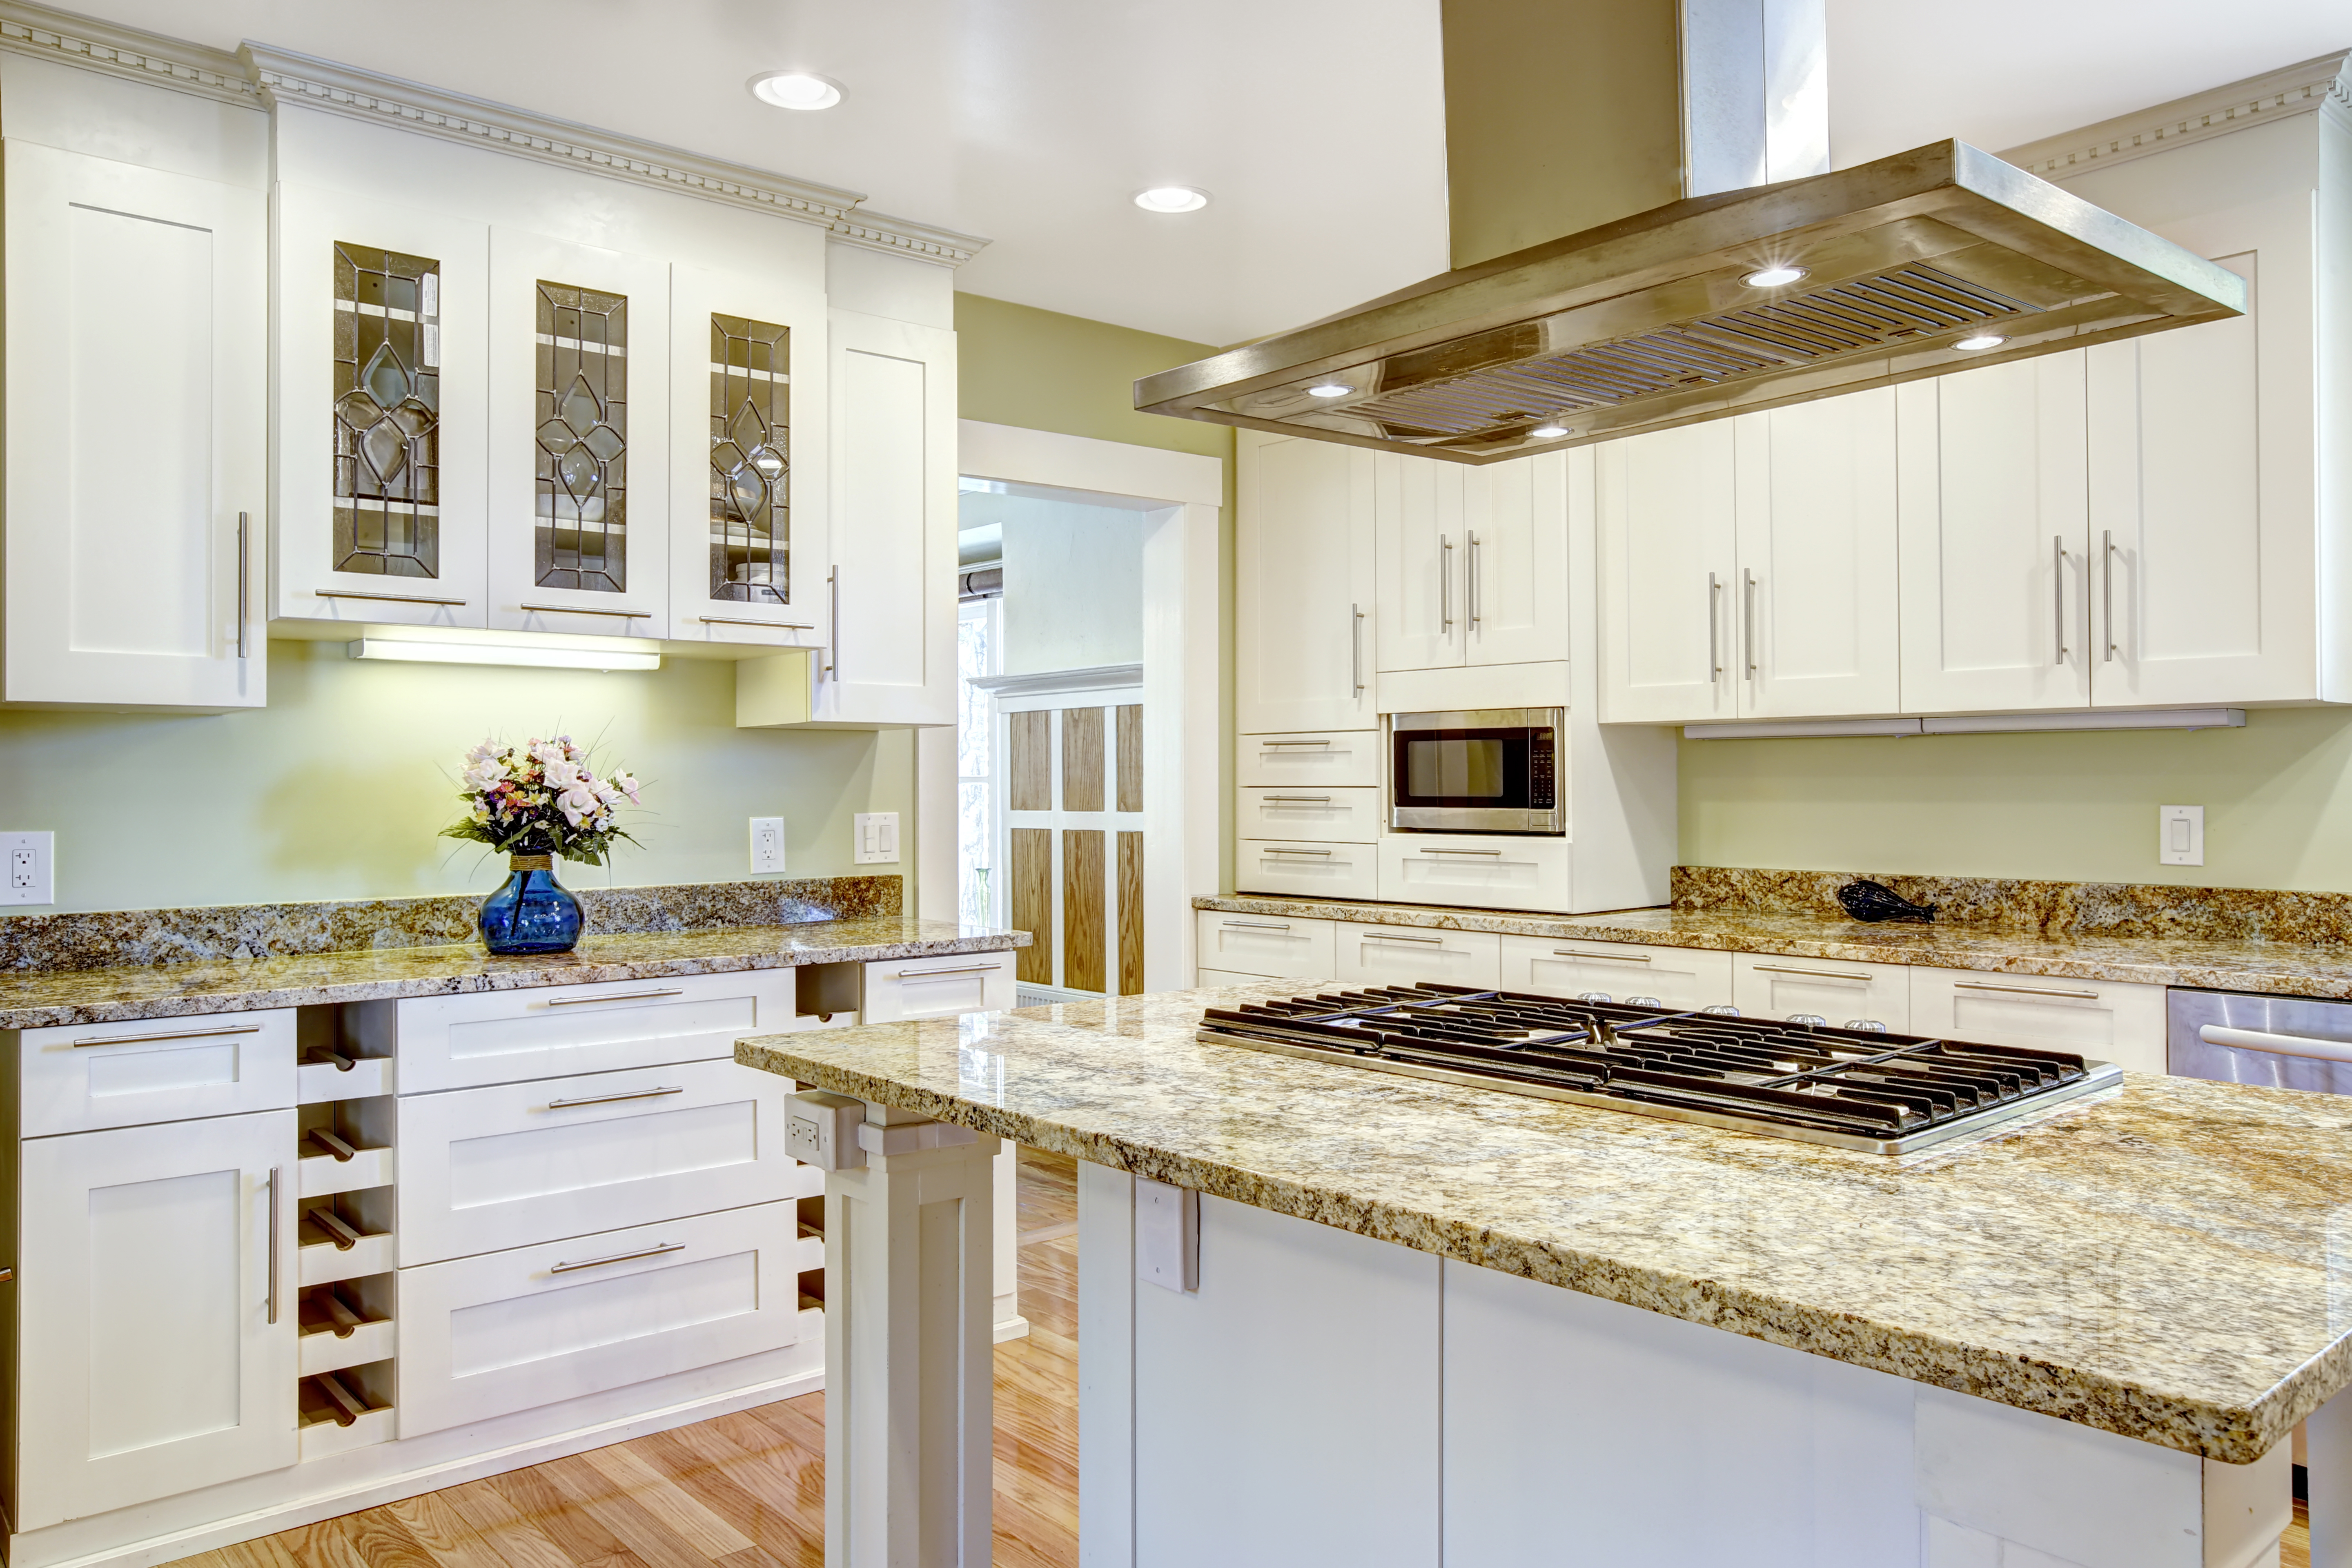 Kitchen island with built-in stove, granite top and hood